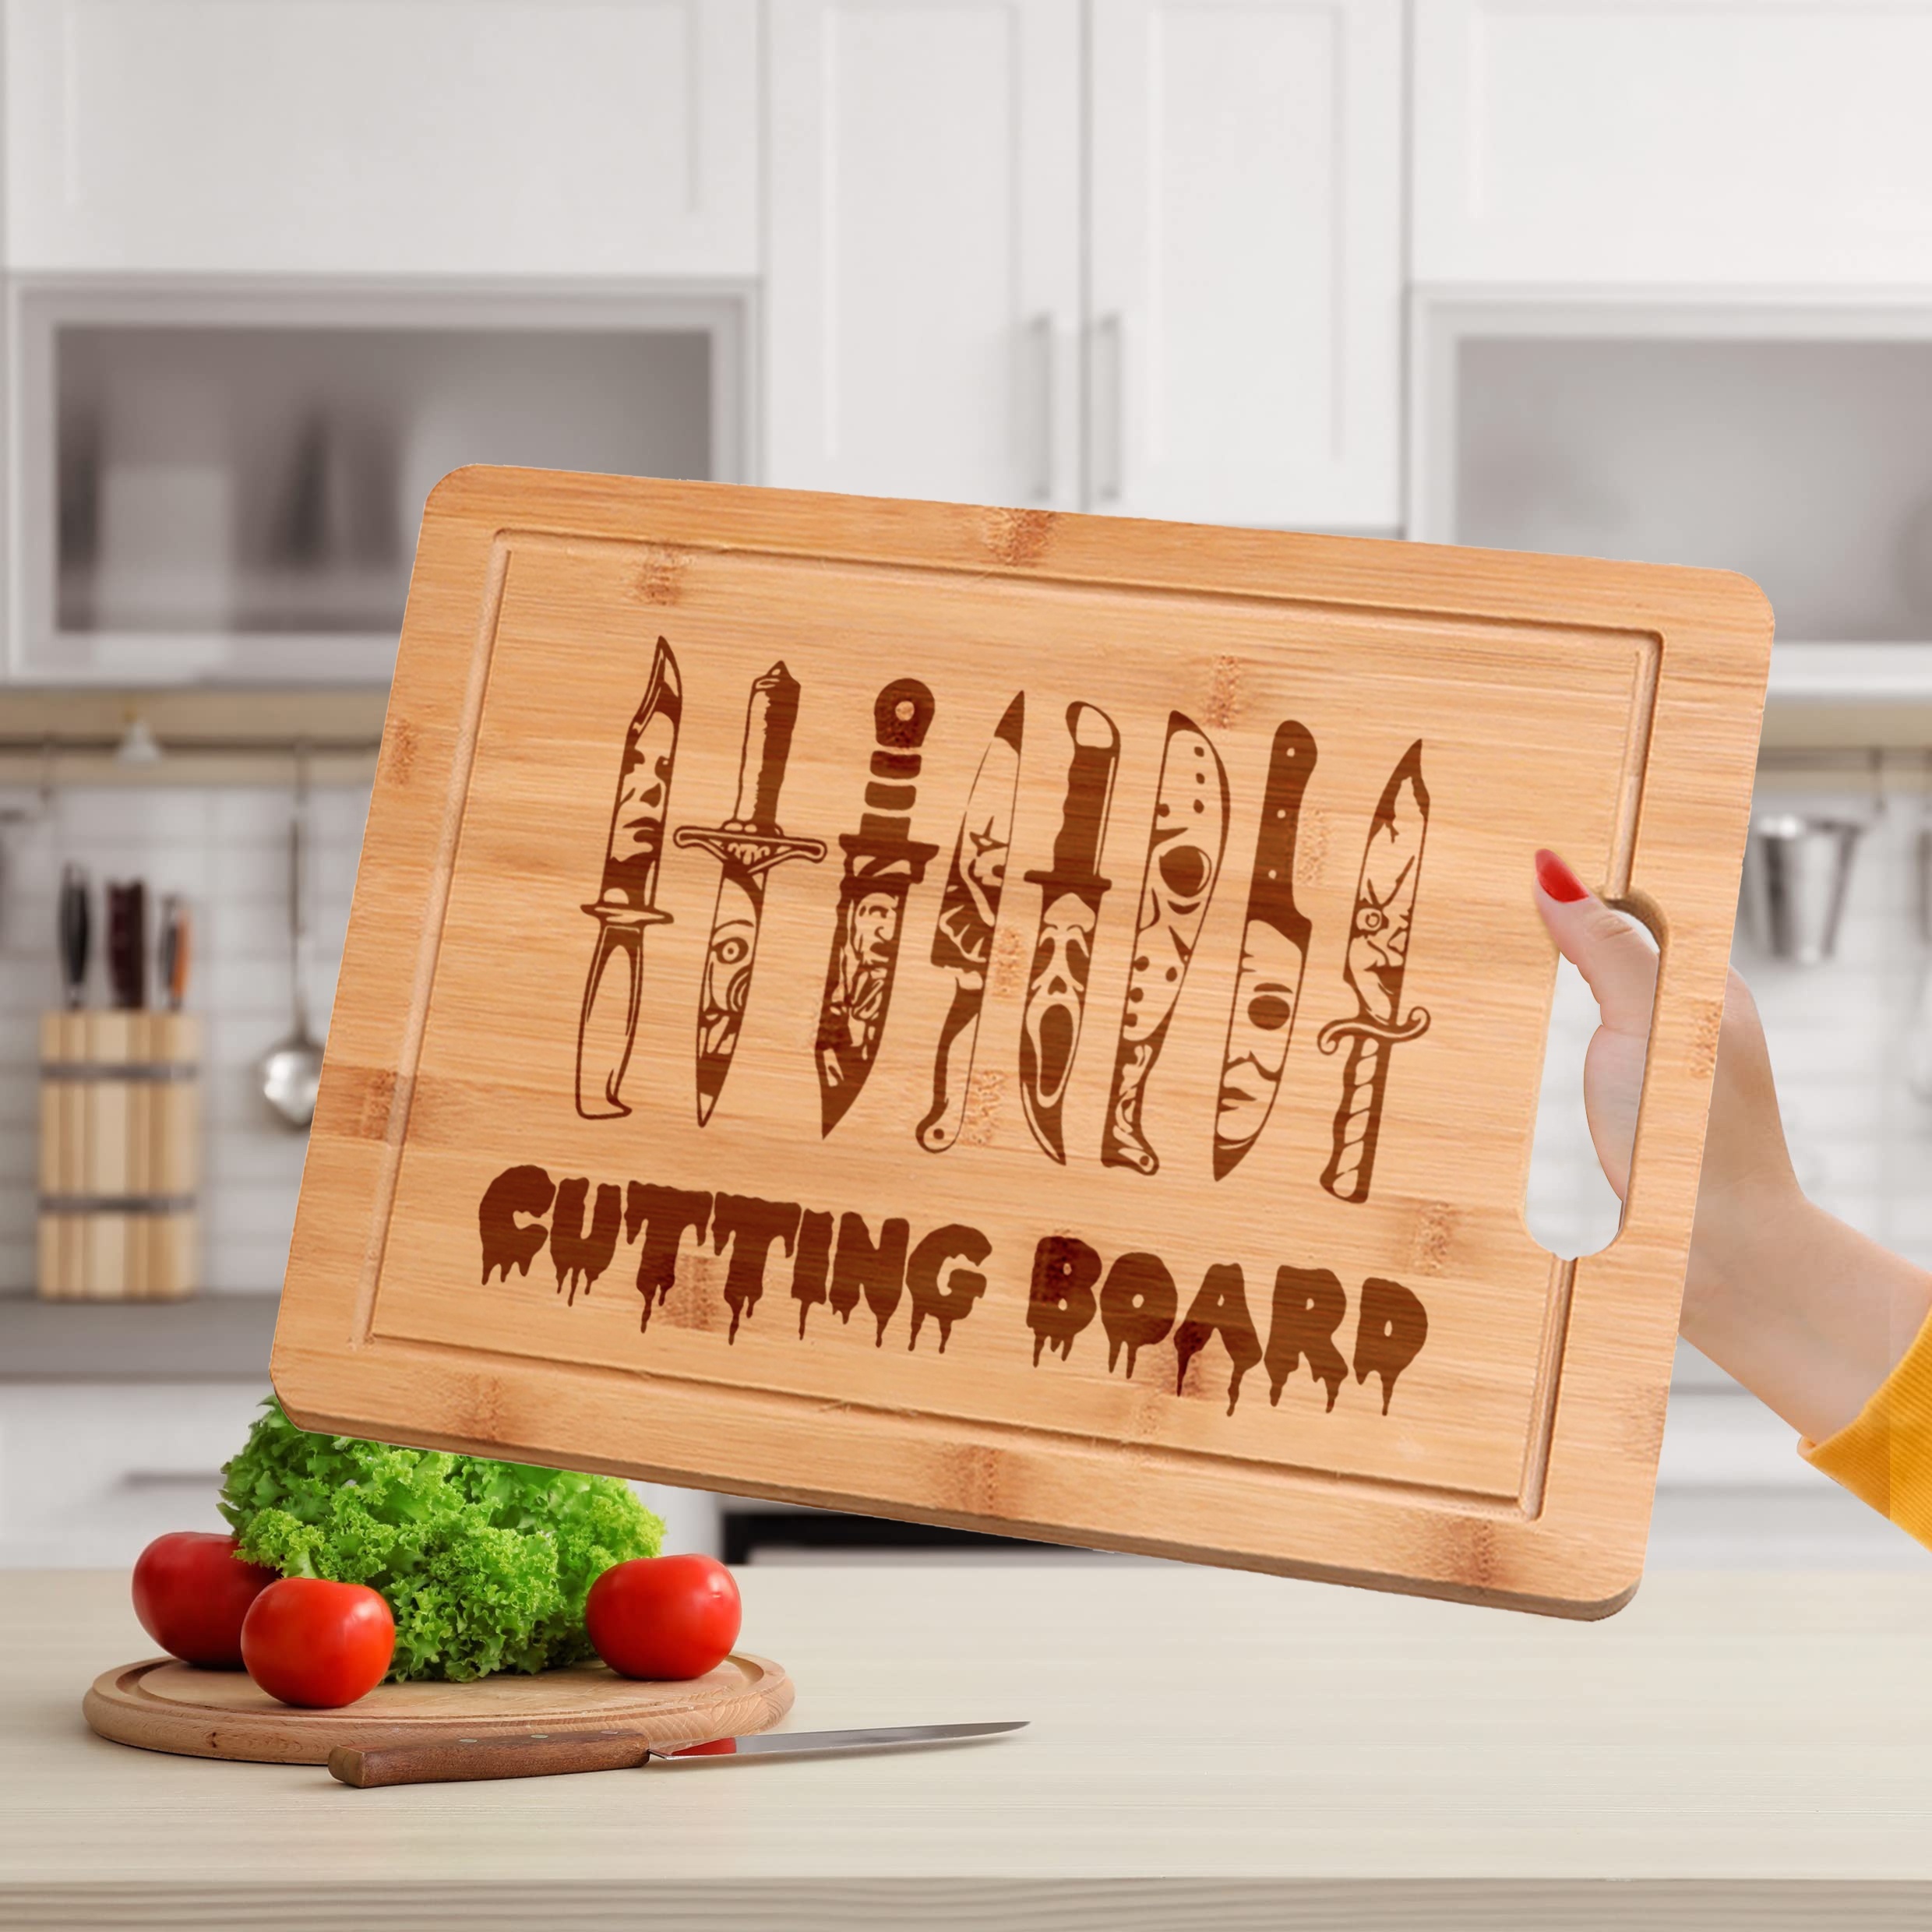 5 Cutting and Chopping Kitchen Tools As Gifts